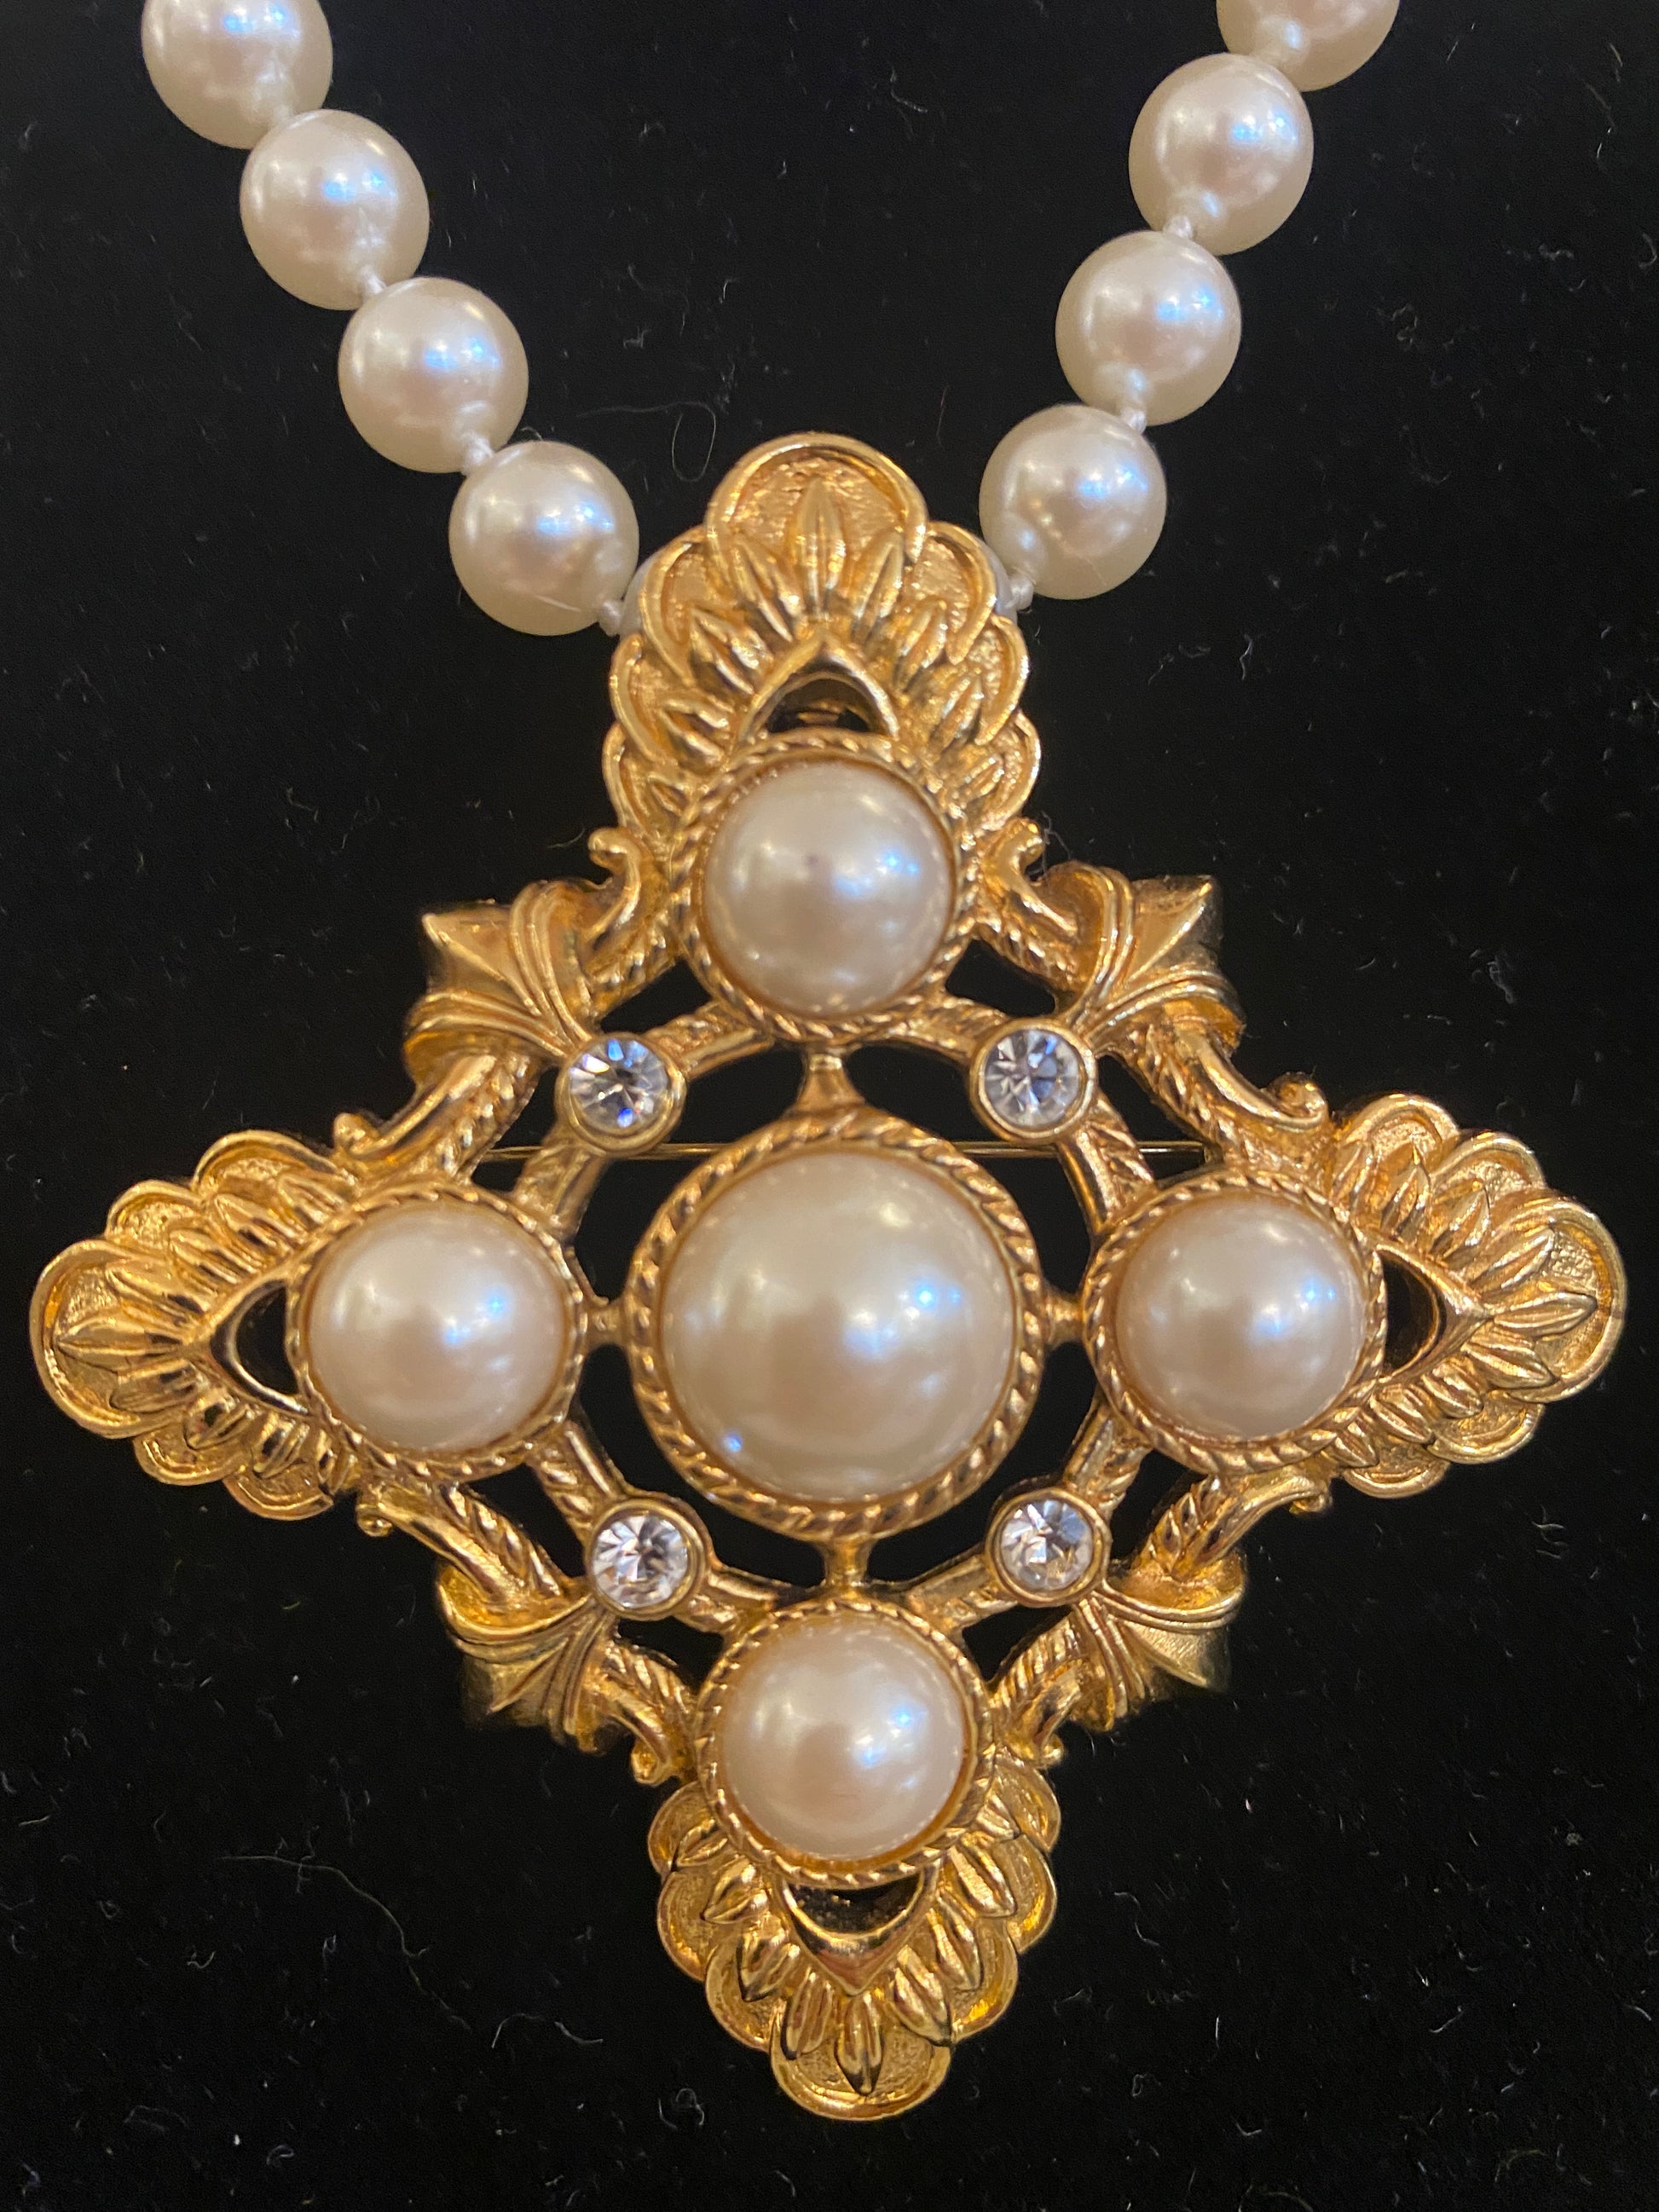 6" Vintage Pearl Necklace w/ Removable Brooch Pendant  